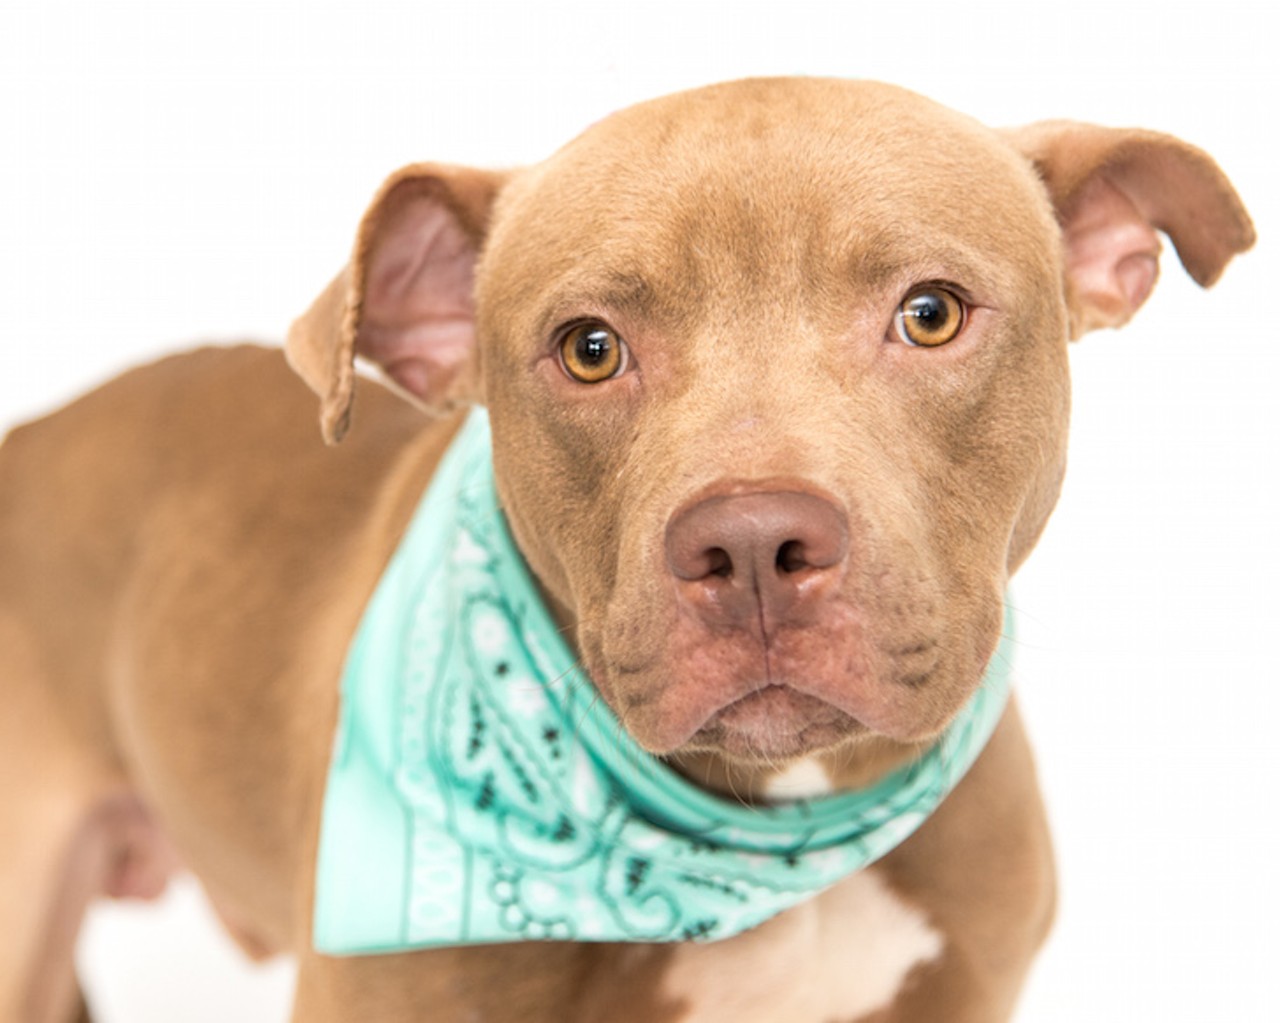 18 adoptable doggos available right now at Orange County Animal Services